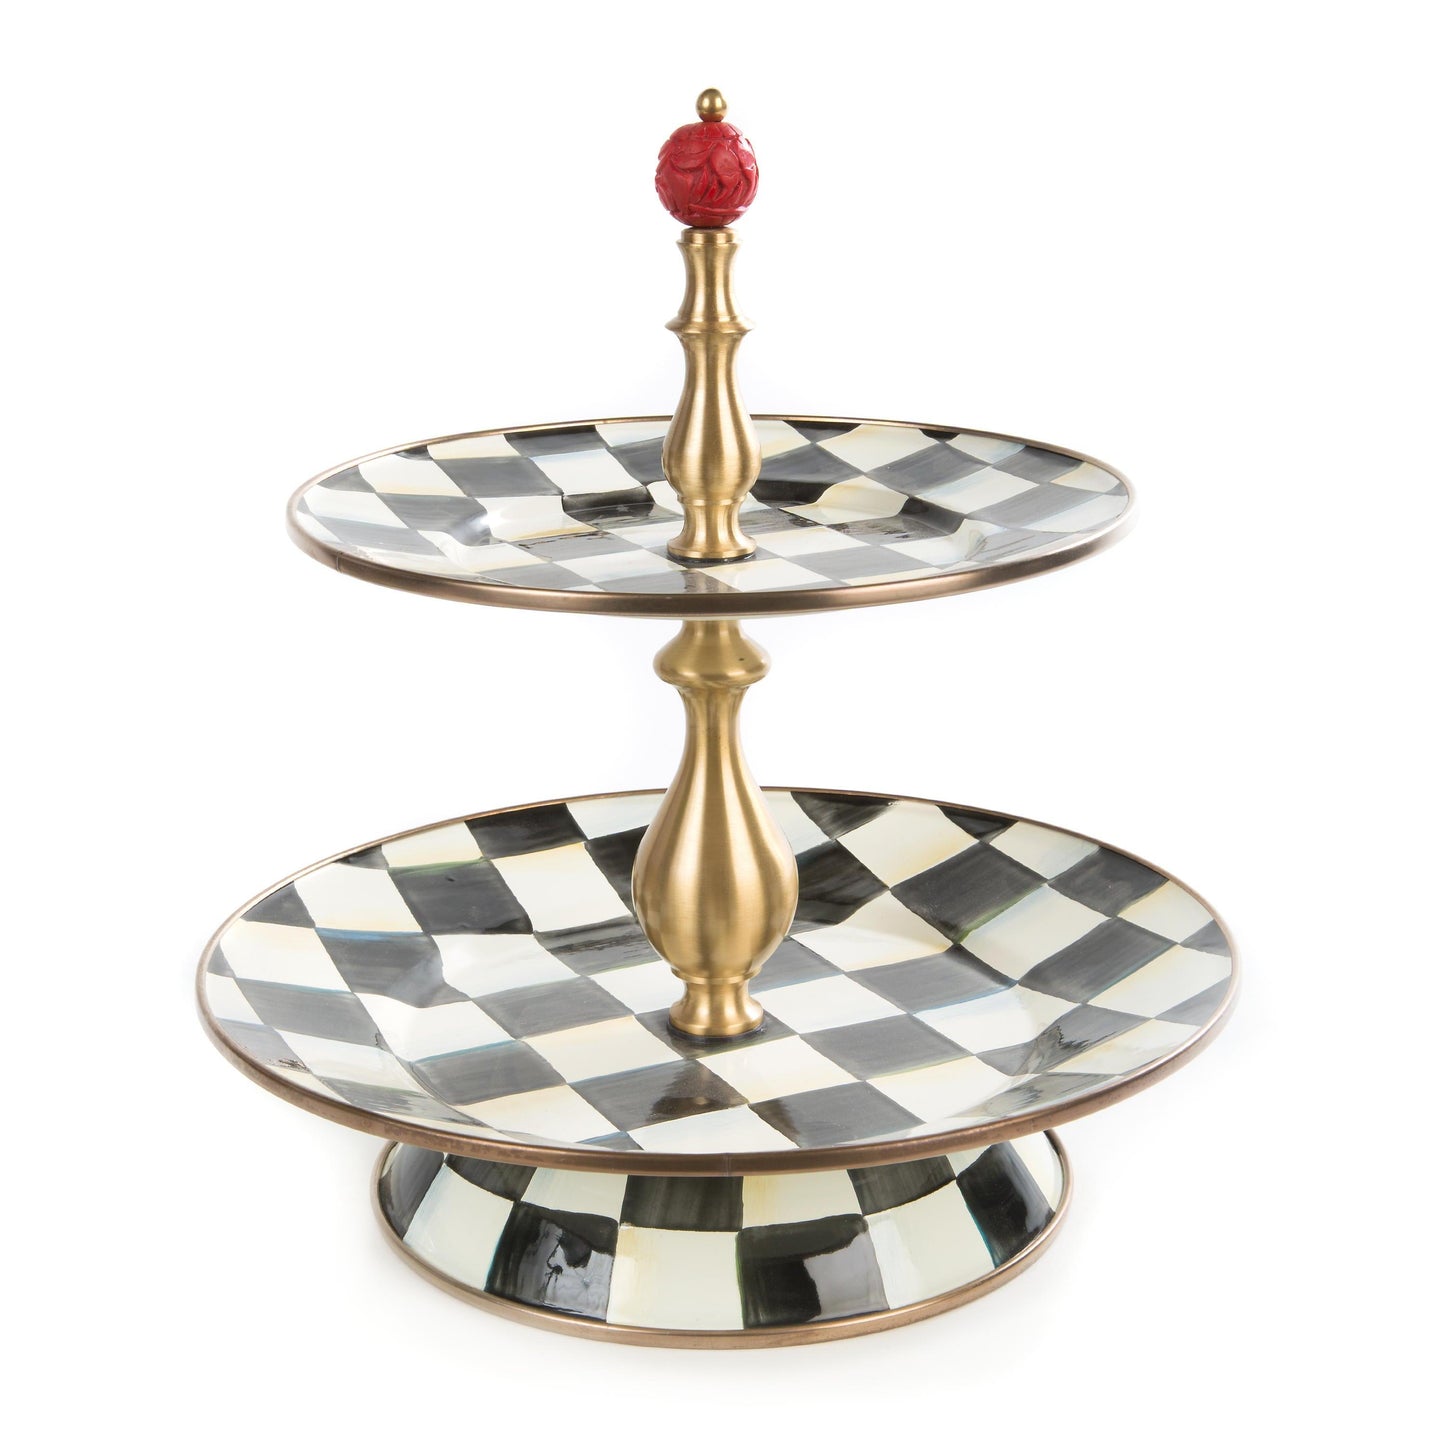 Courtly Check Enamel Two Tier Sweet Stand (Mackenzie Childs) - Gallery Gifts Online 